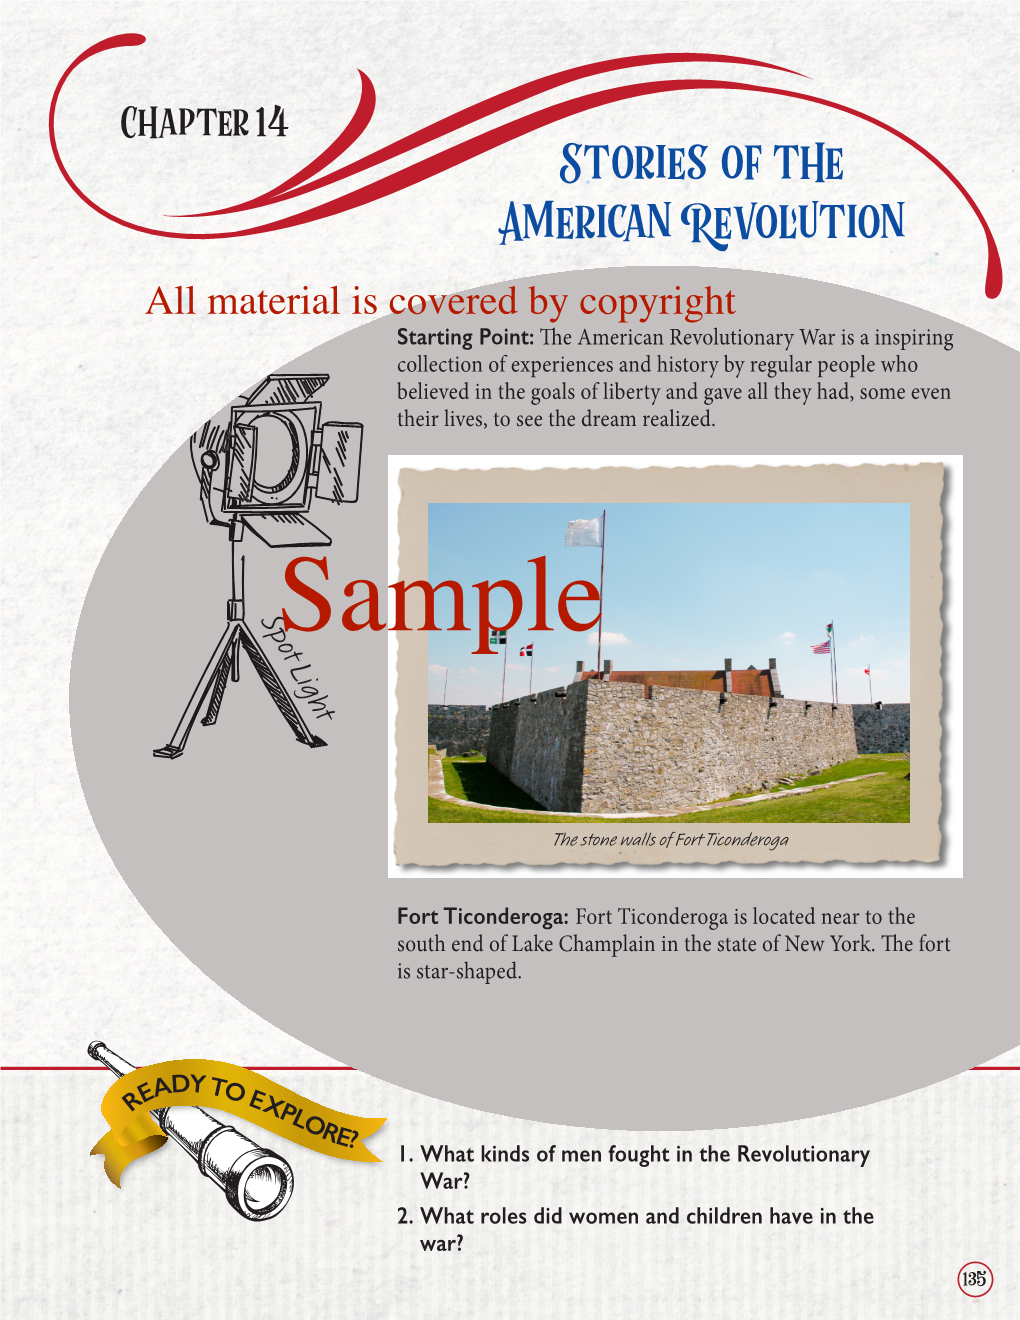 American Revolution Timeline” in Your Student’S Journal